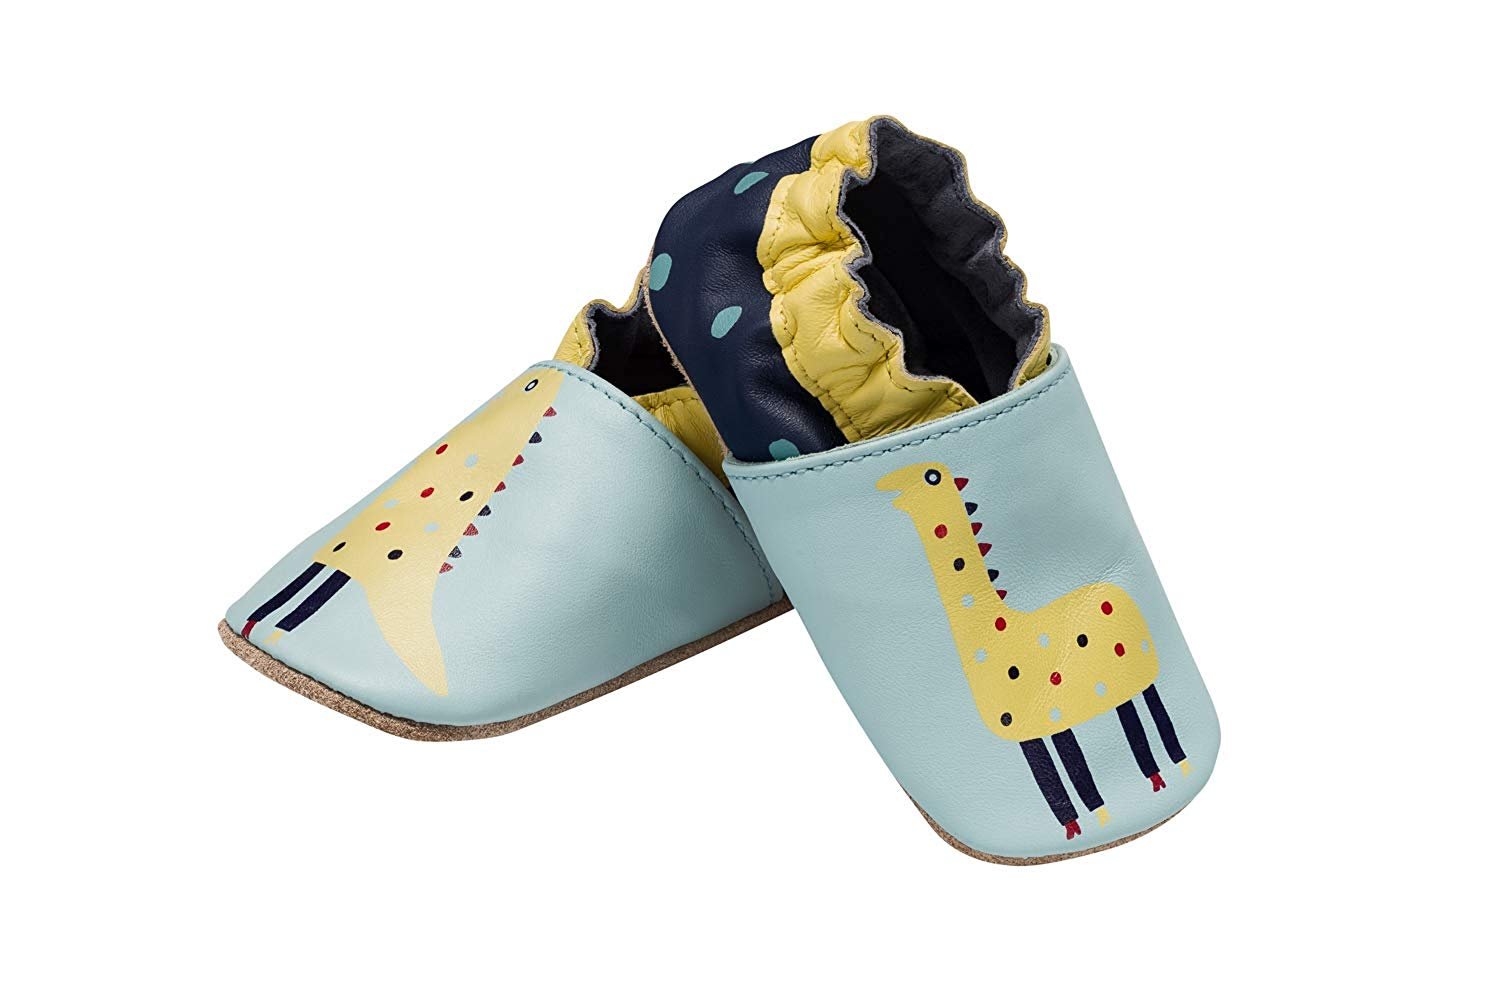 Baby Toddler Infant Non Slip Shoes, Soft Leather, Flexible, Slippers,Suede Sole | eBay